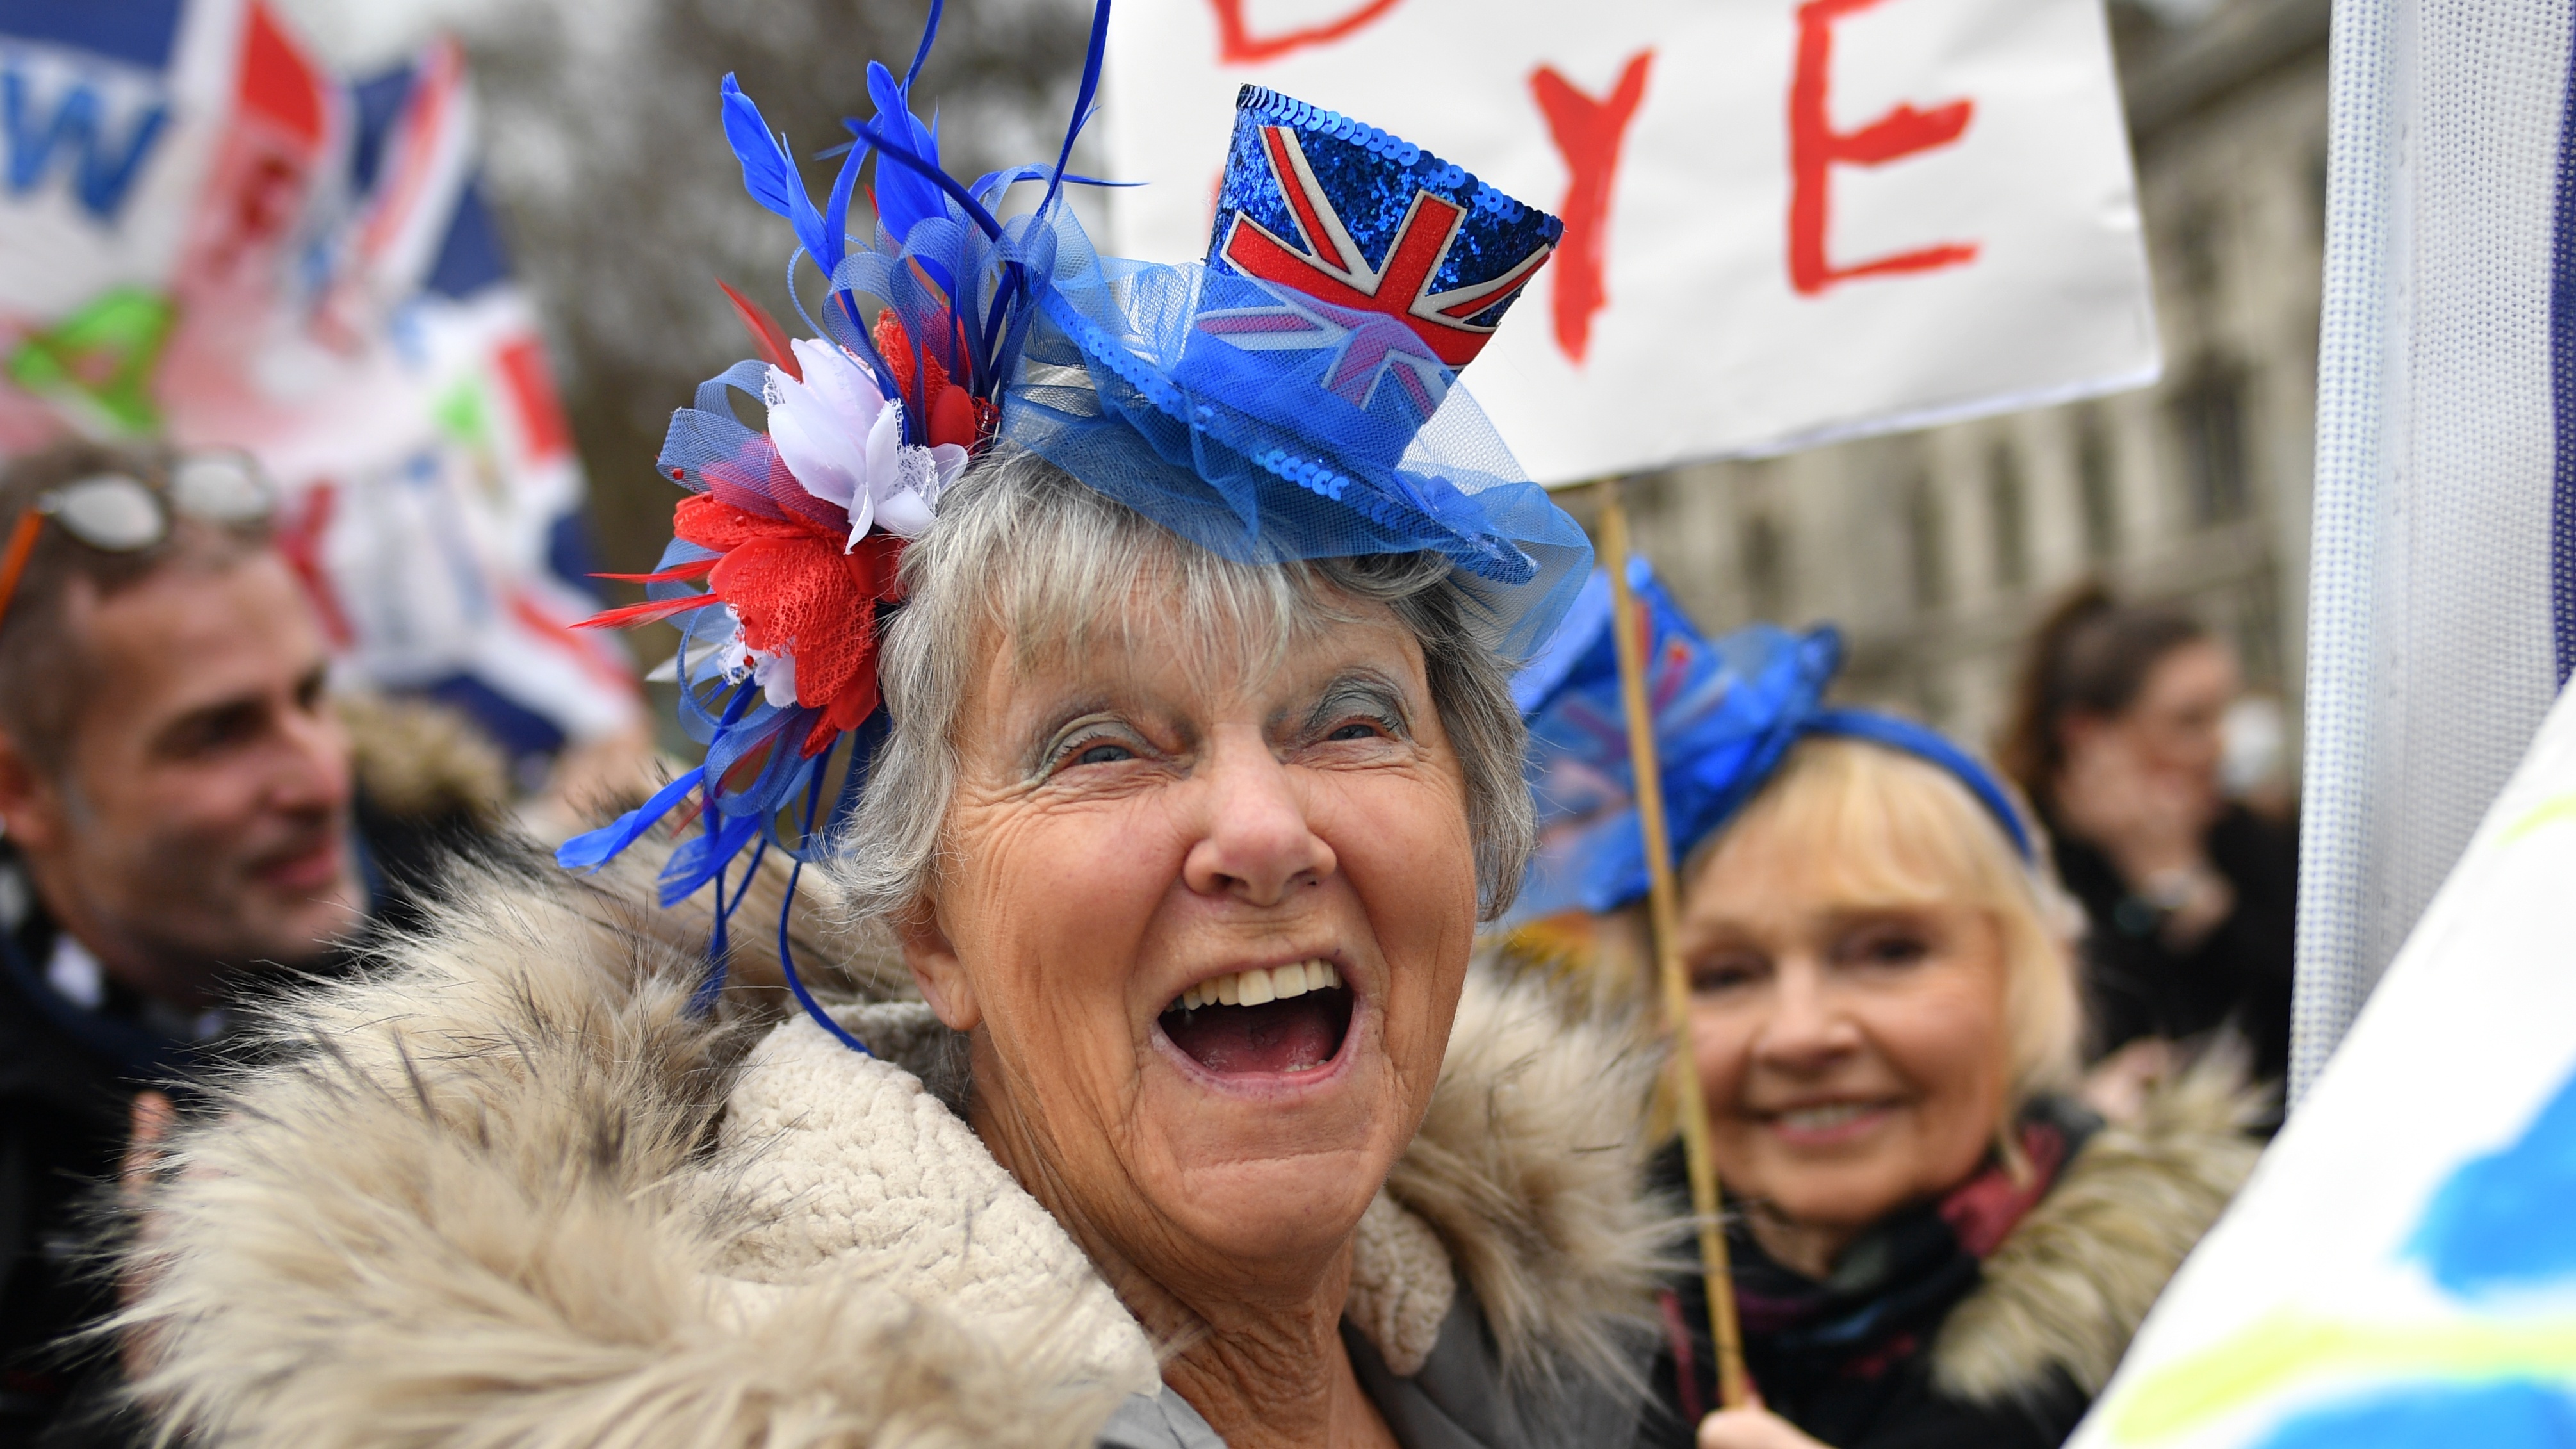 Pro-Brexit supporters outside the Houses of Parliament 